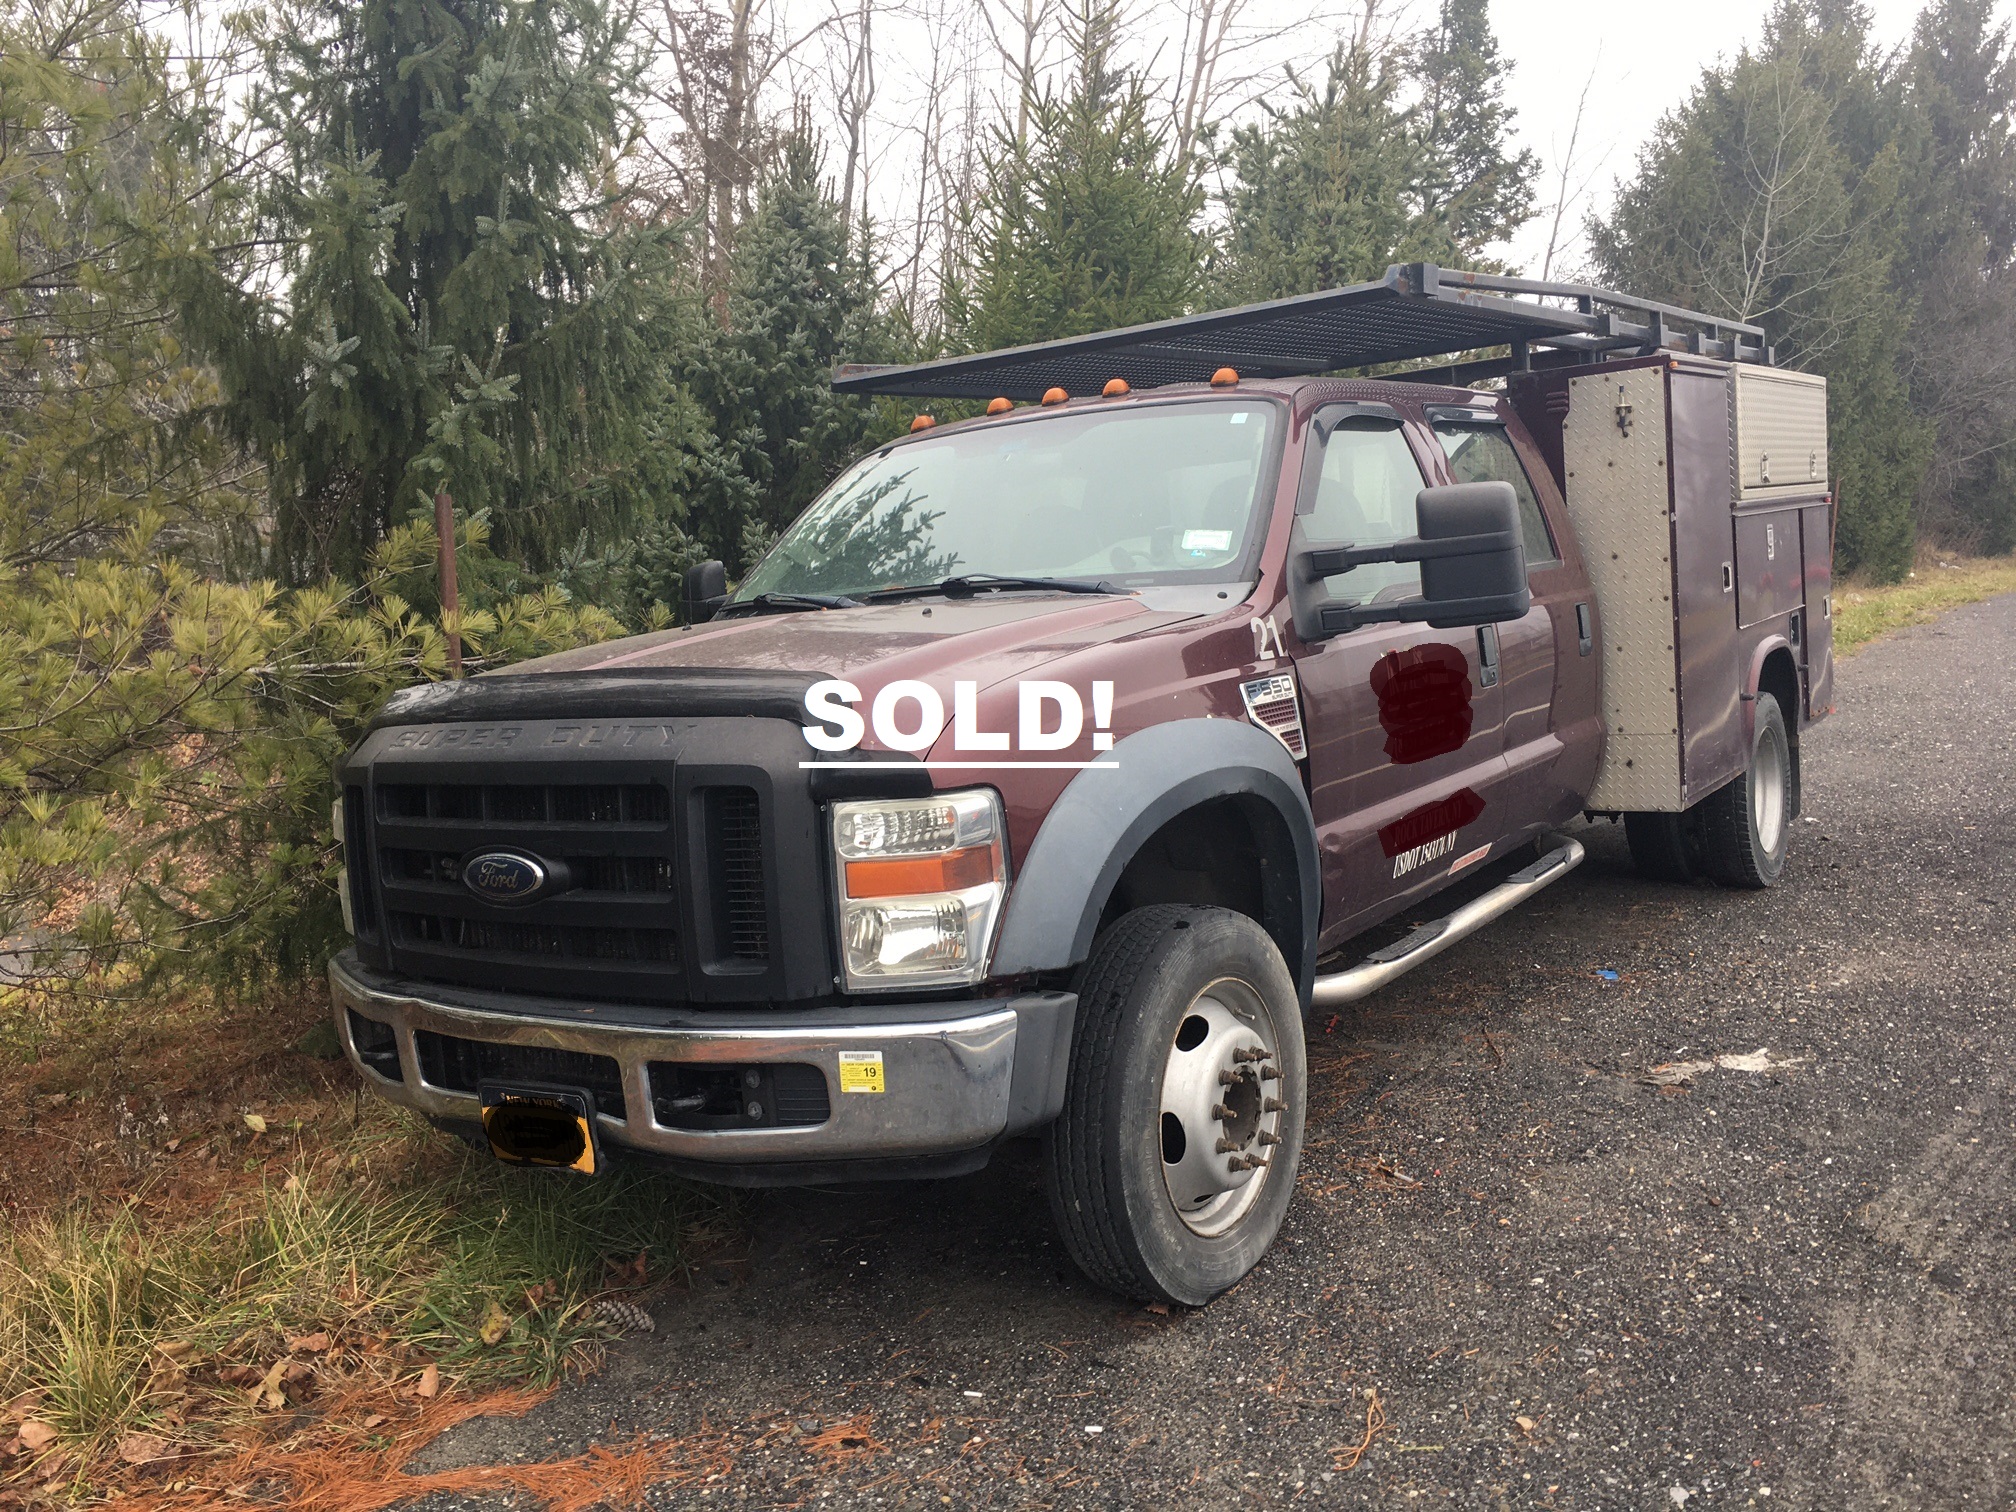 Ford F550 service truck. A 2009 XL Super Duty service truck with a 6.4 V8 power stroke diesel engine. Automatic transmission and an 11 foot tool rack utility box. The truck has approximately 170K miles. Engine runs but loses power.